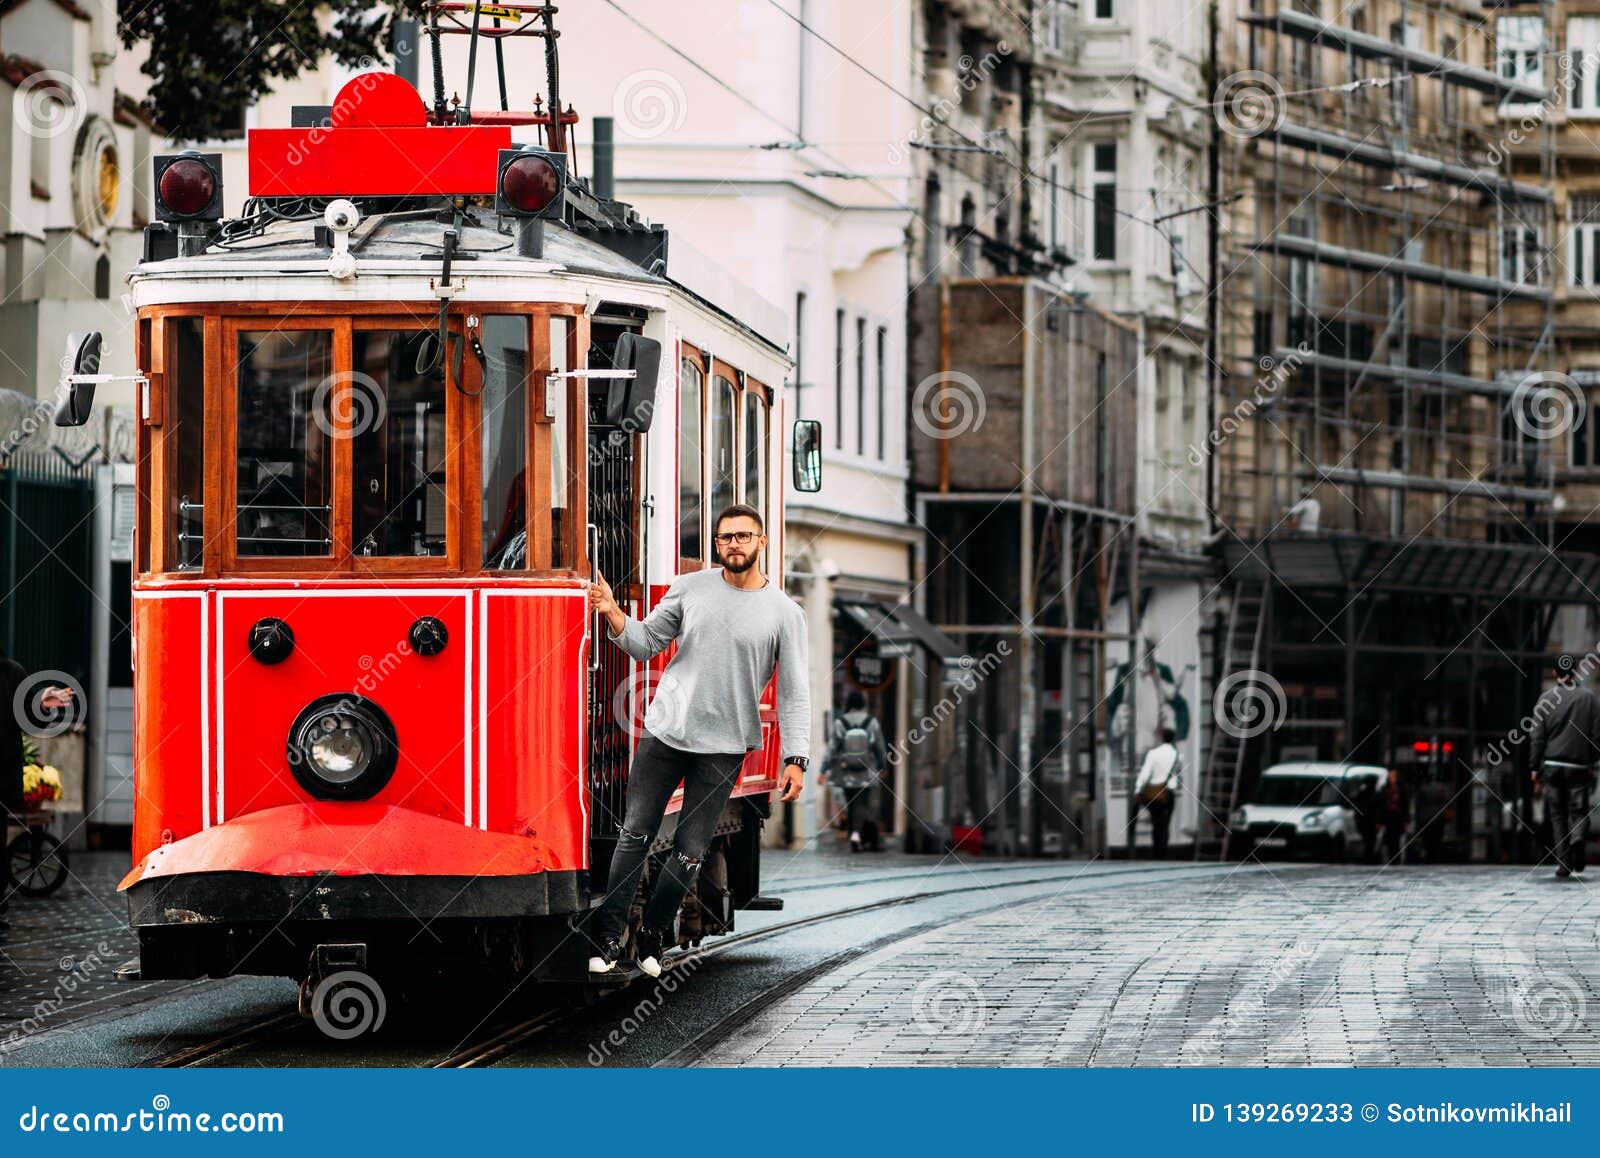 man in a vintage tram on the taksim istiklal street in istanbul. man on public transport. old turkish tram on istiklal street,